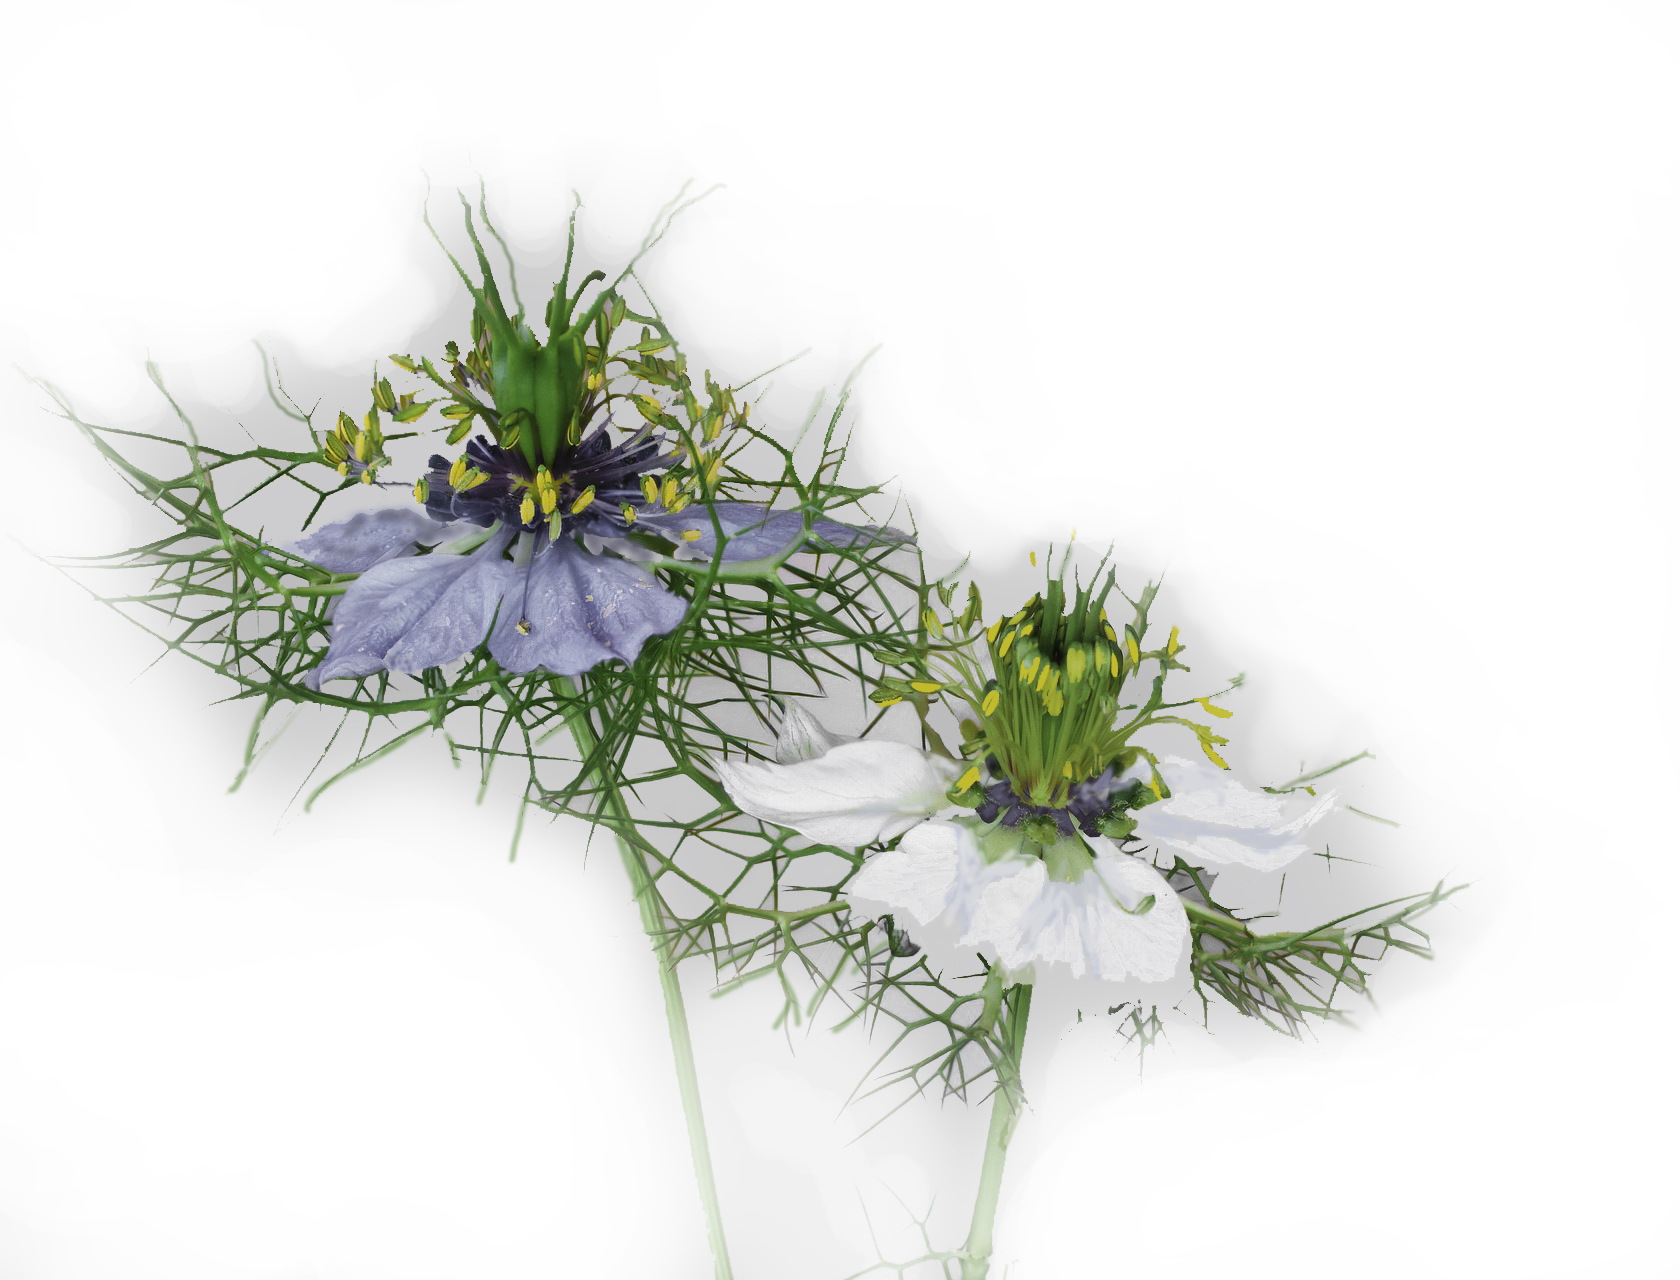 Black Seed Oil comes from the lovely Nigella sativa flower